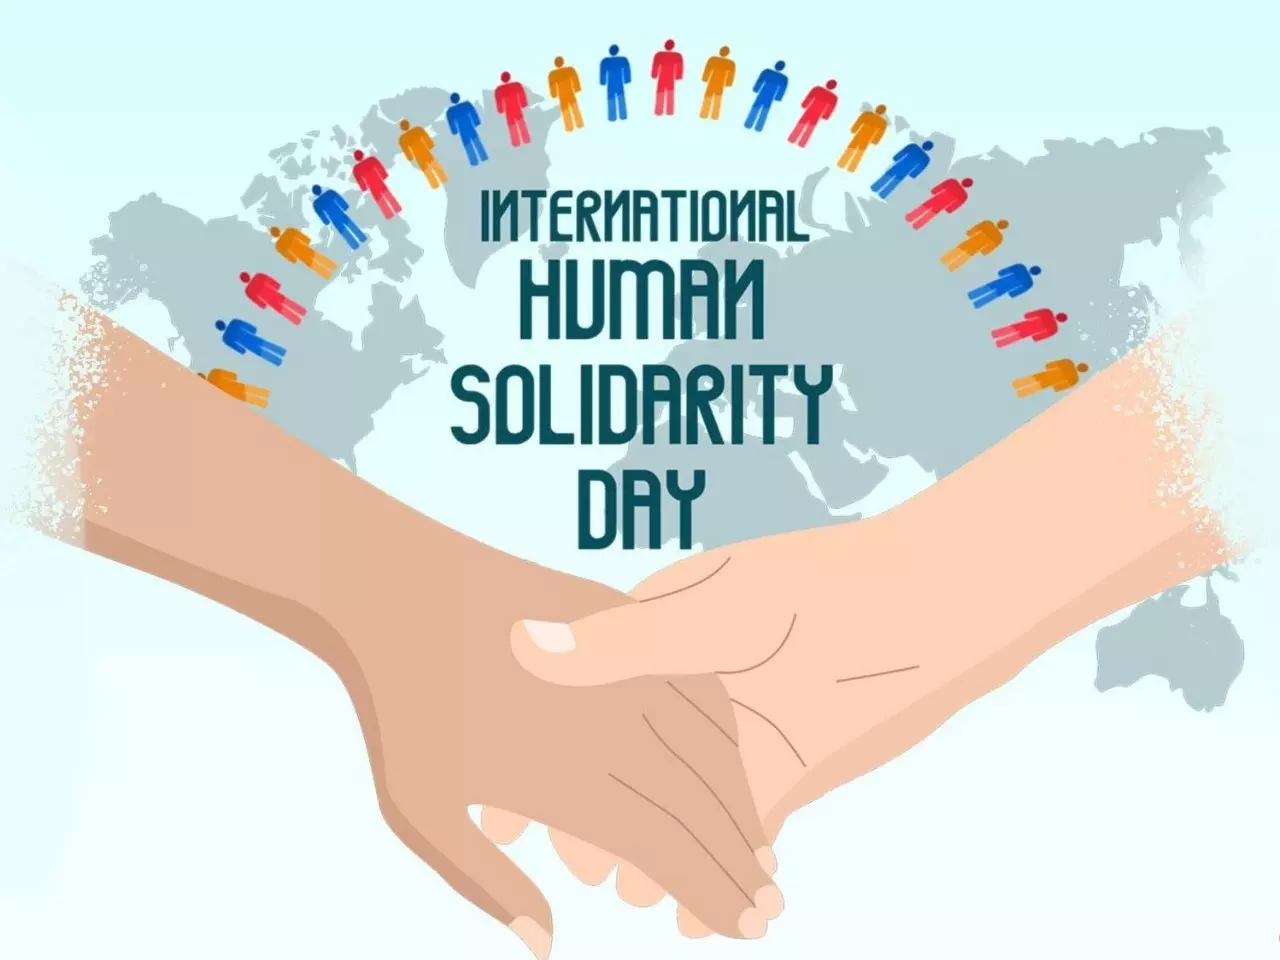 International Human Solidarity Day - When Is It, Date, Why Is it Celebrated, And History